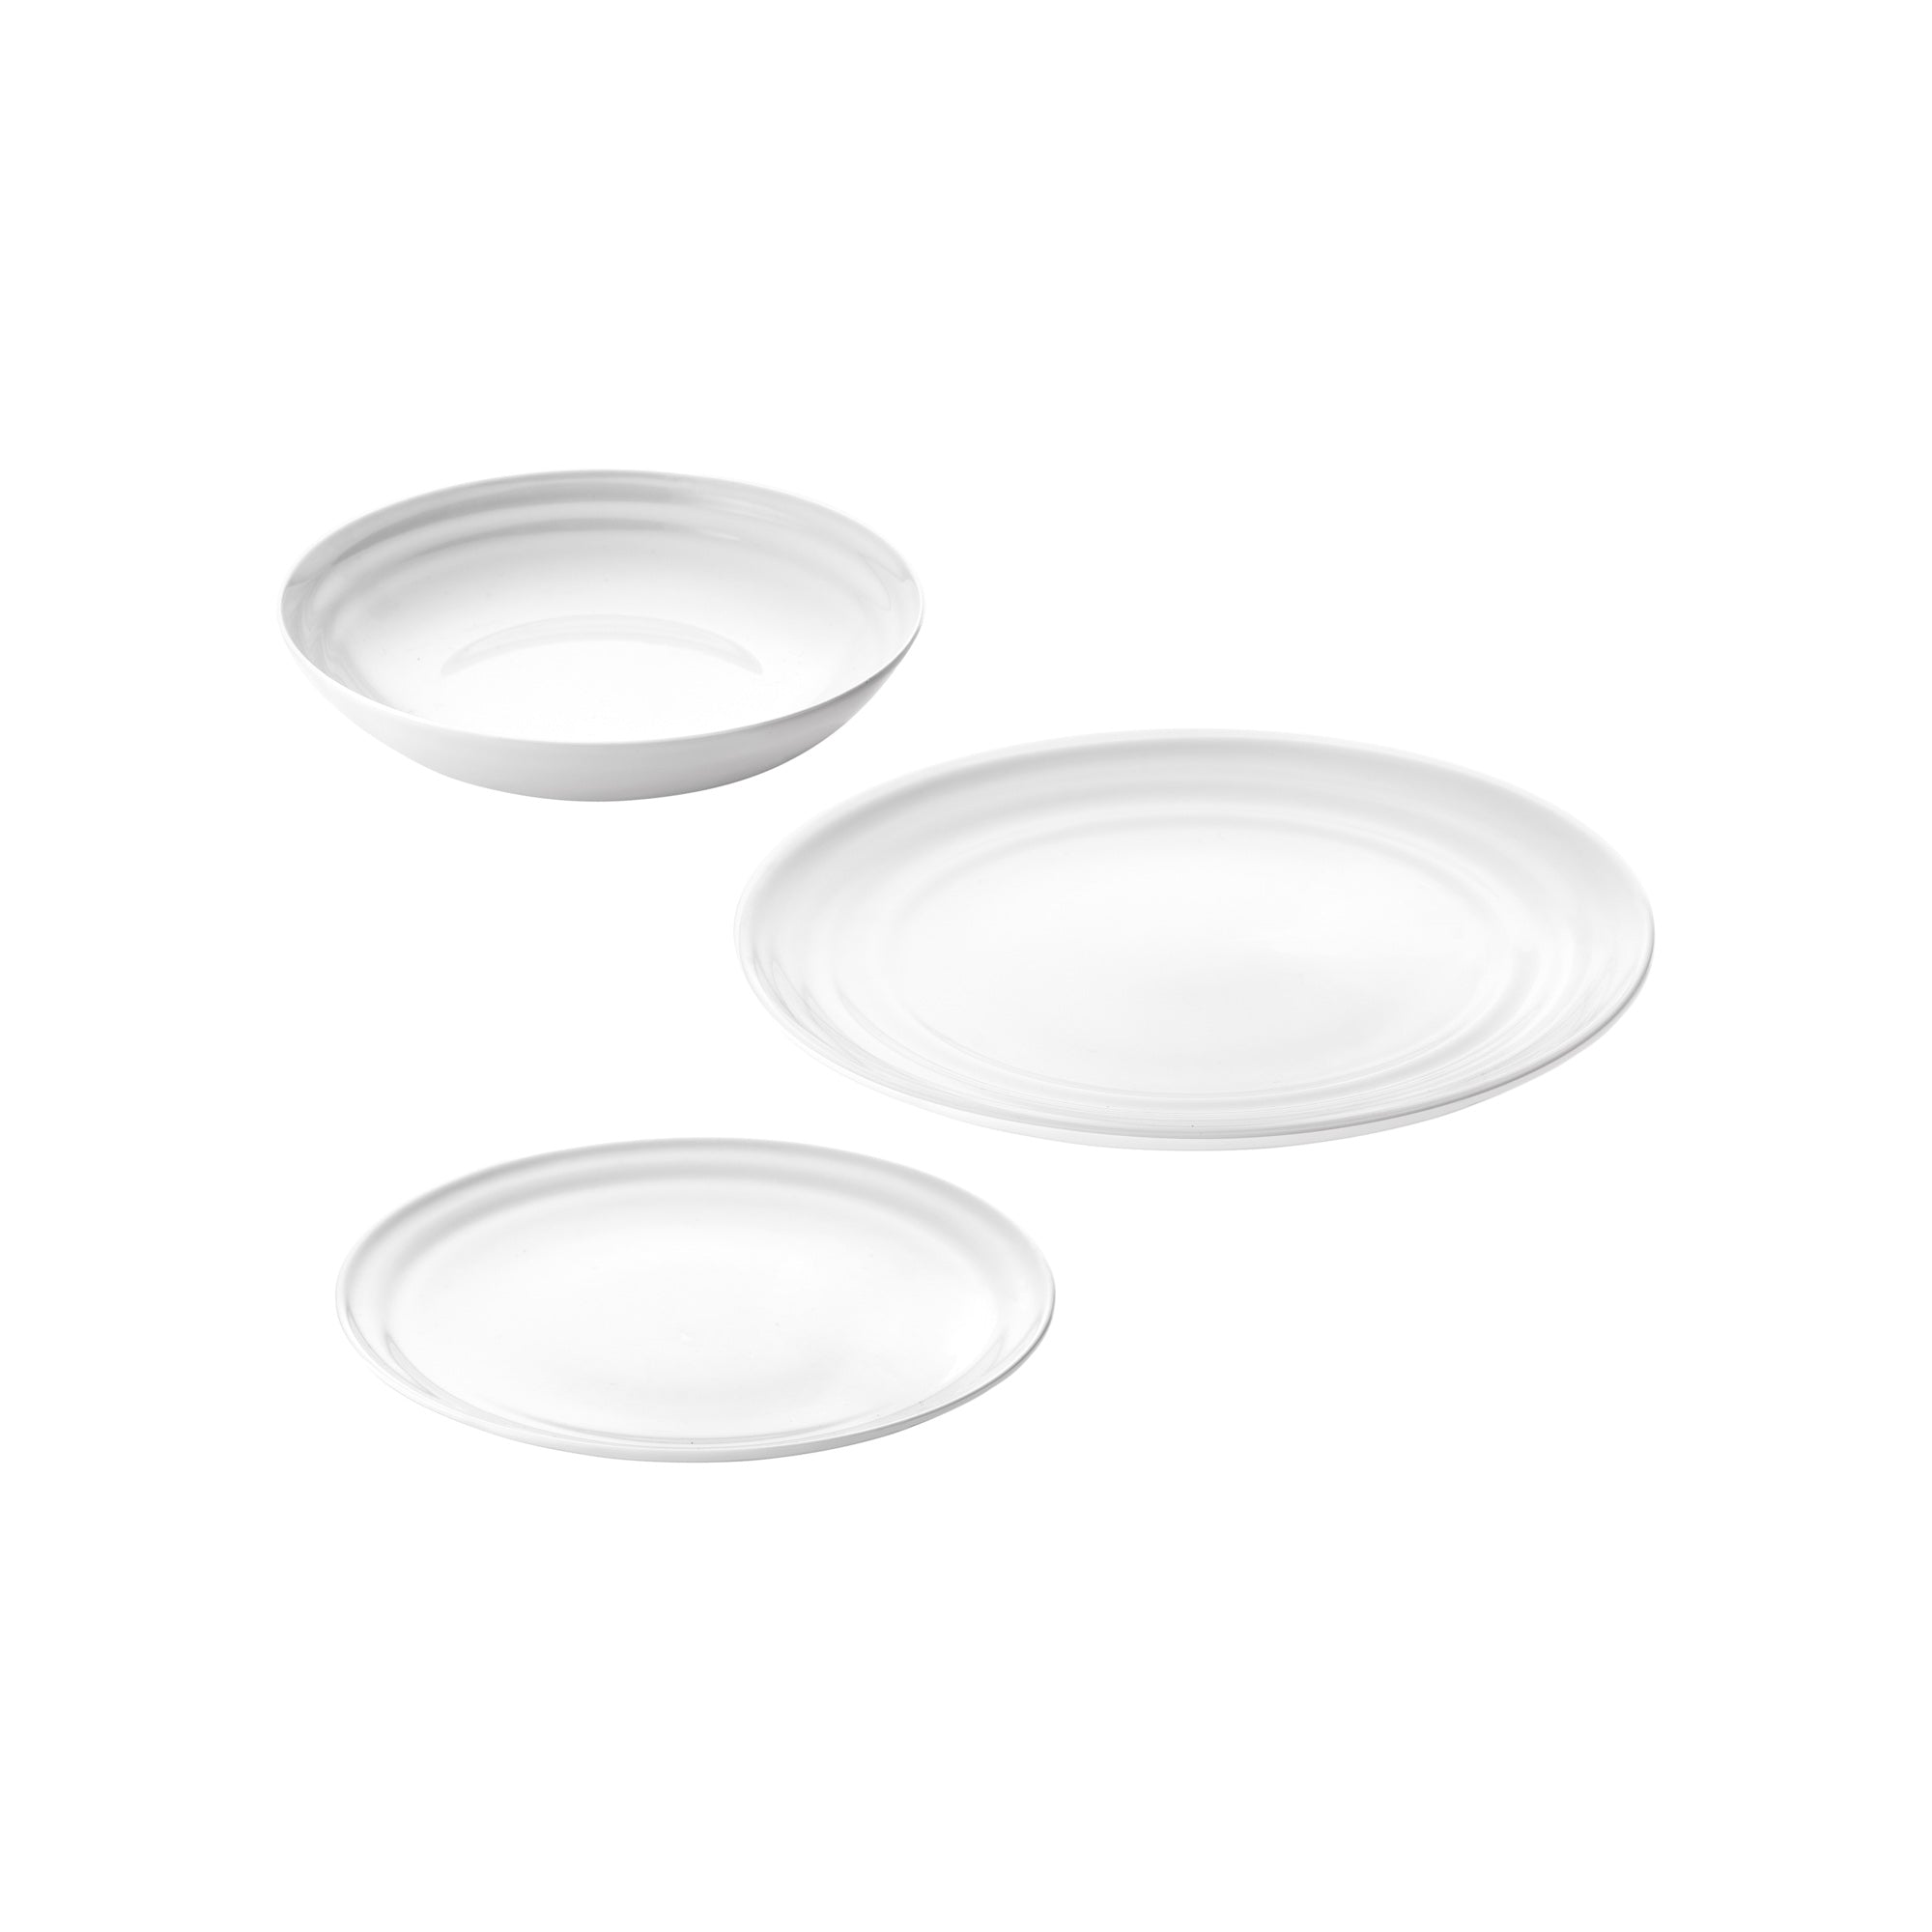 SET OF 6 PLACE SETTINGS "EVERYDAY"